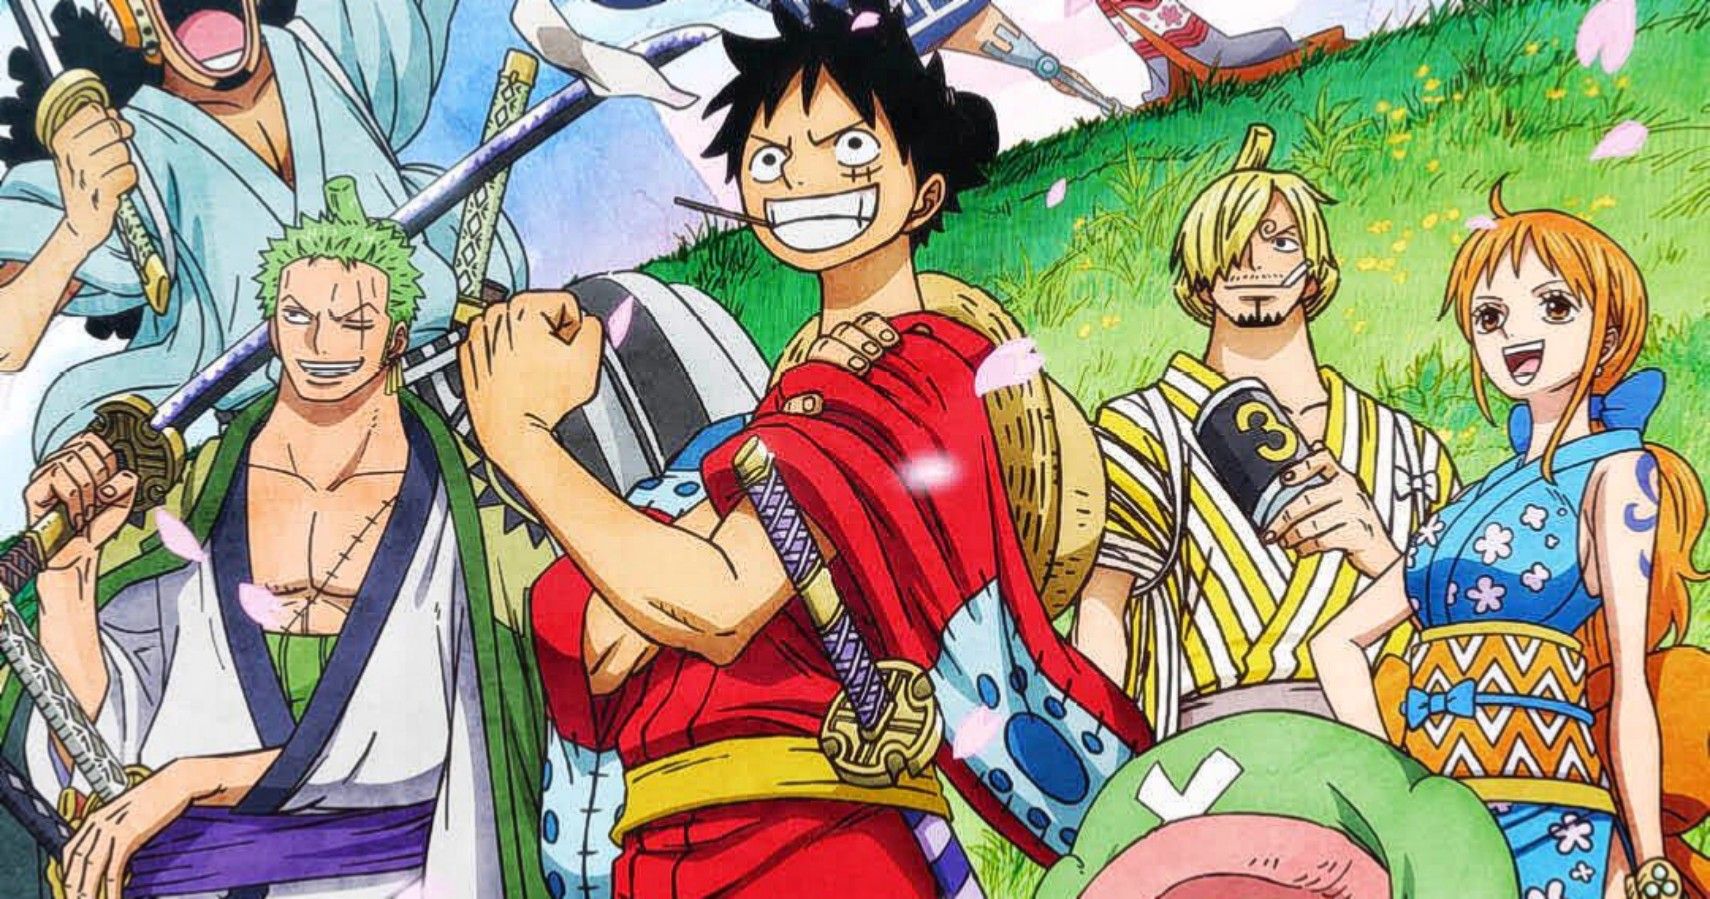 Luffy flexing his muscle in front of the Straw Hats in One Piece's Wano Country Arc.